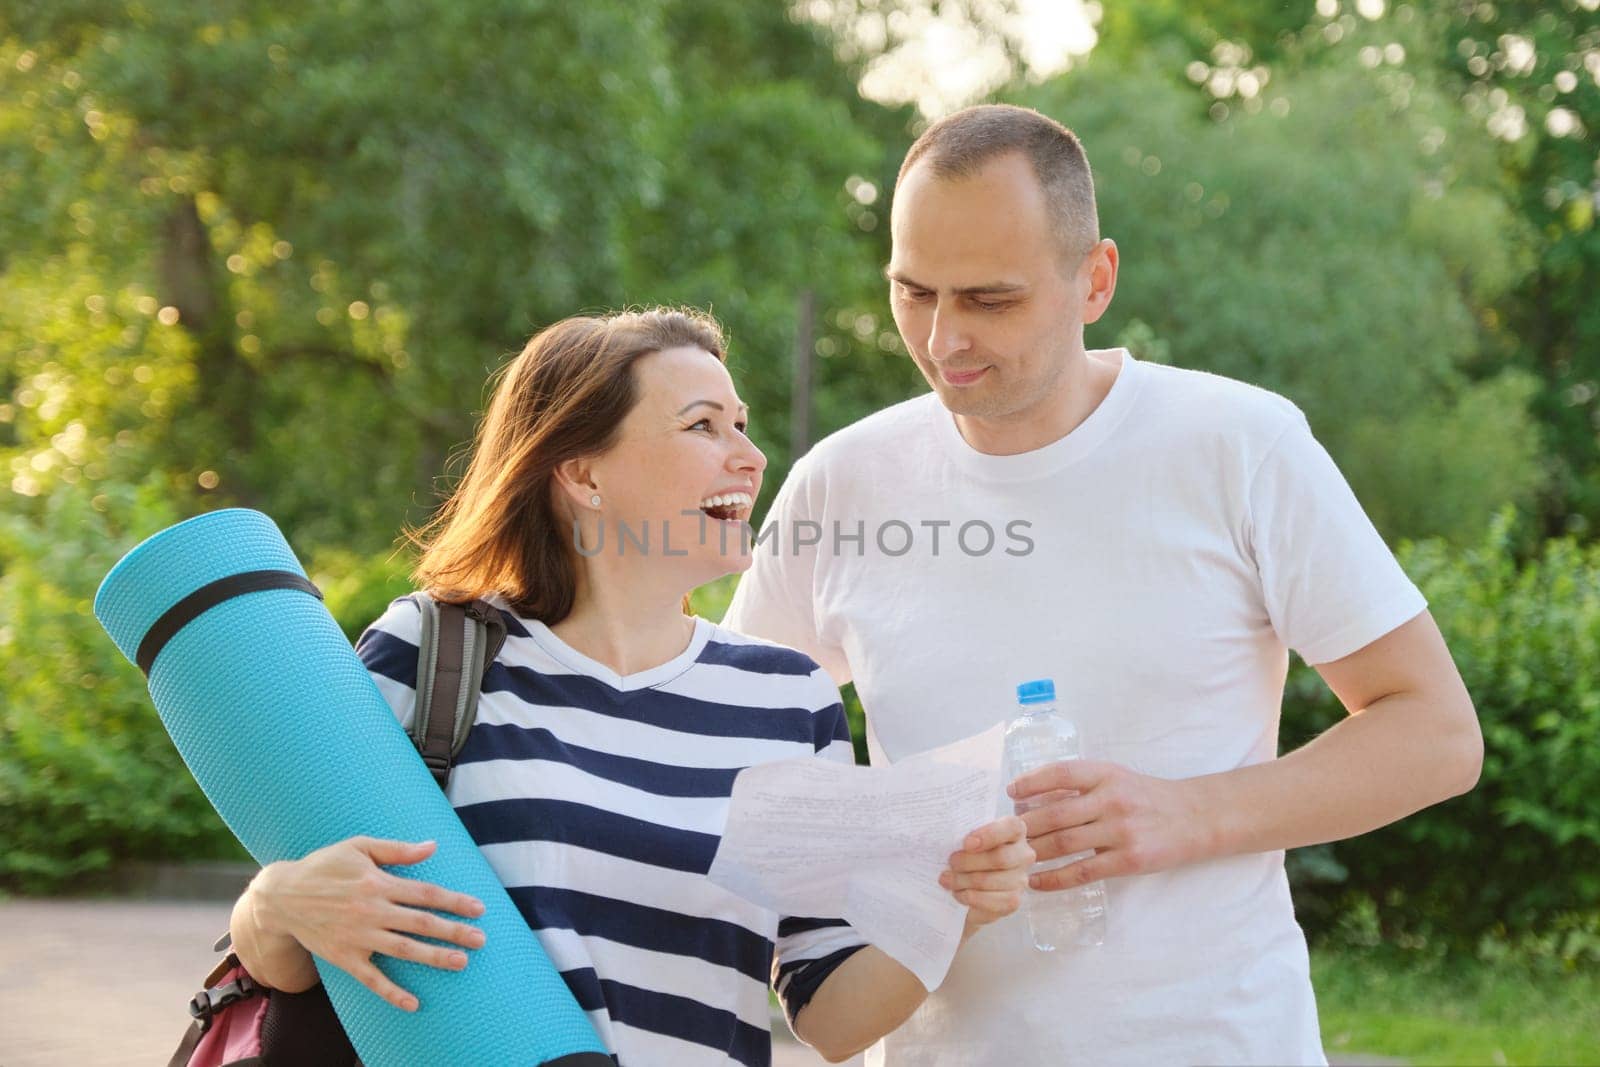 Smiling woman and man reading paper letter, emotion of joy happiness by VH-studio